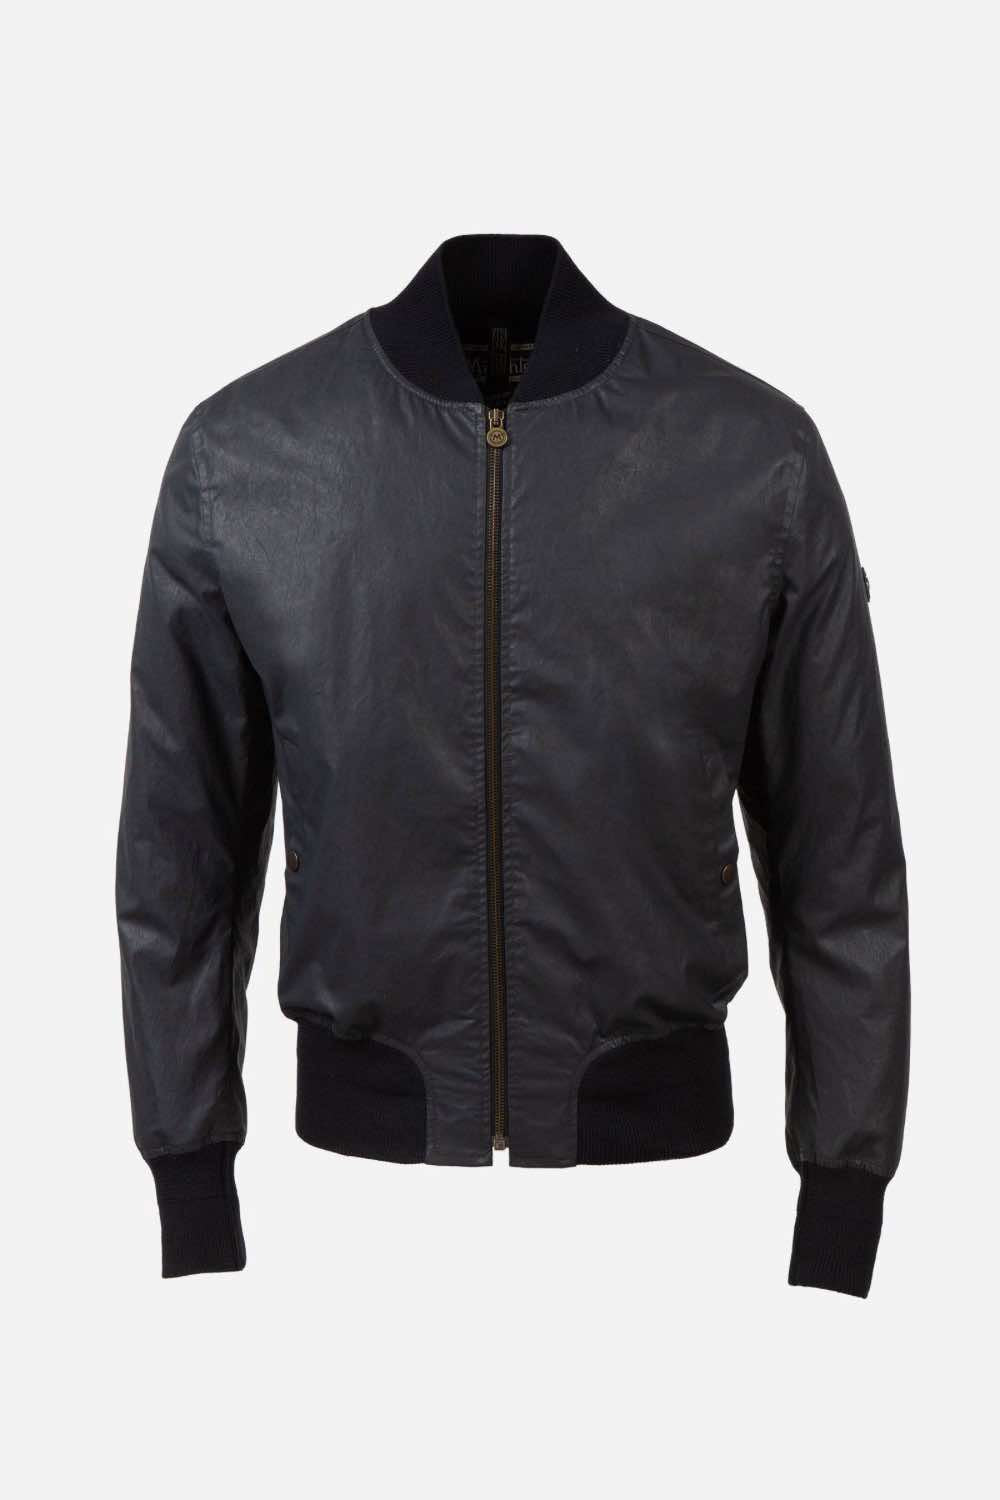 Matchless Ian Men's Cotton Bomber Jacket Navy - Front View